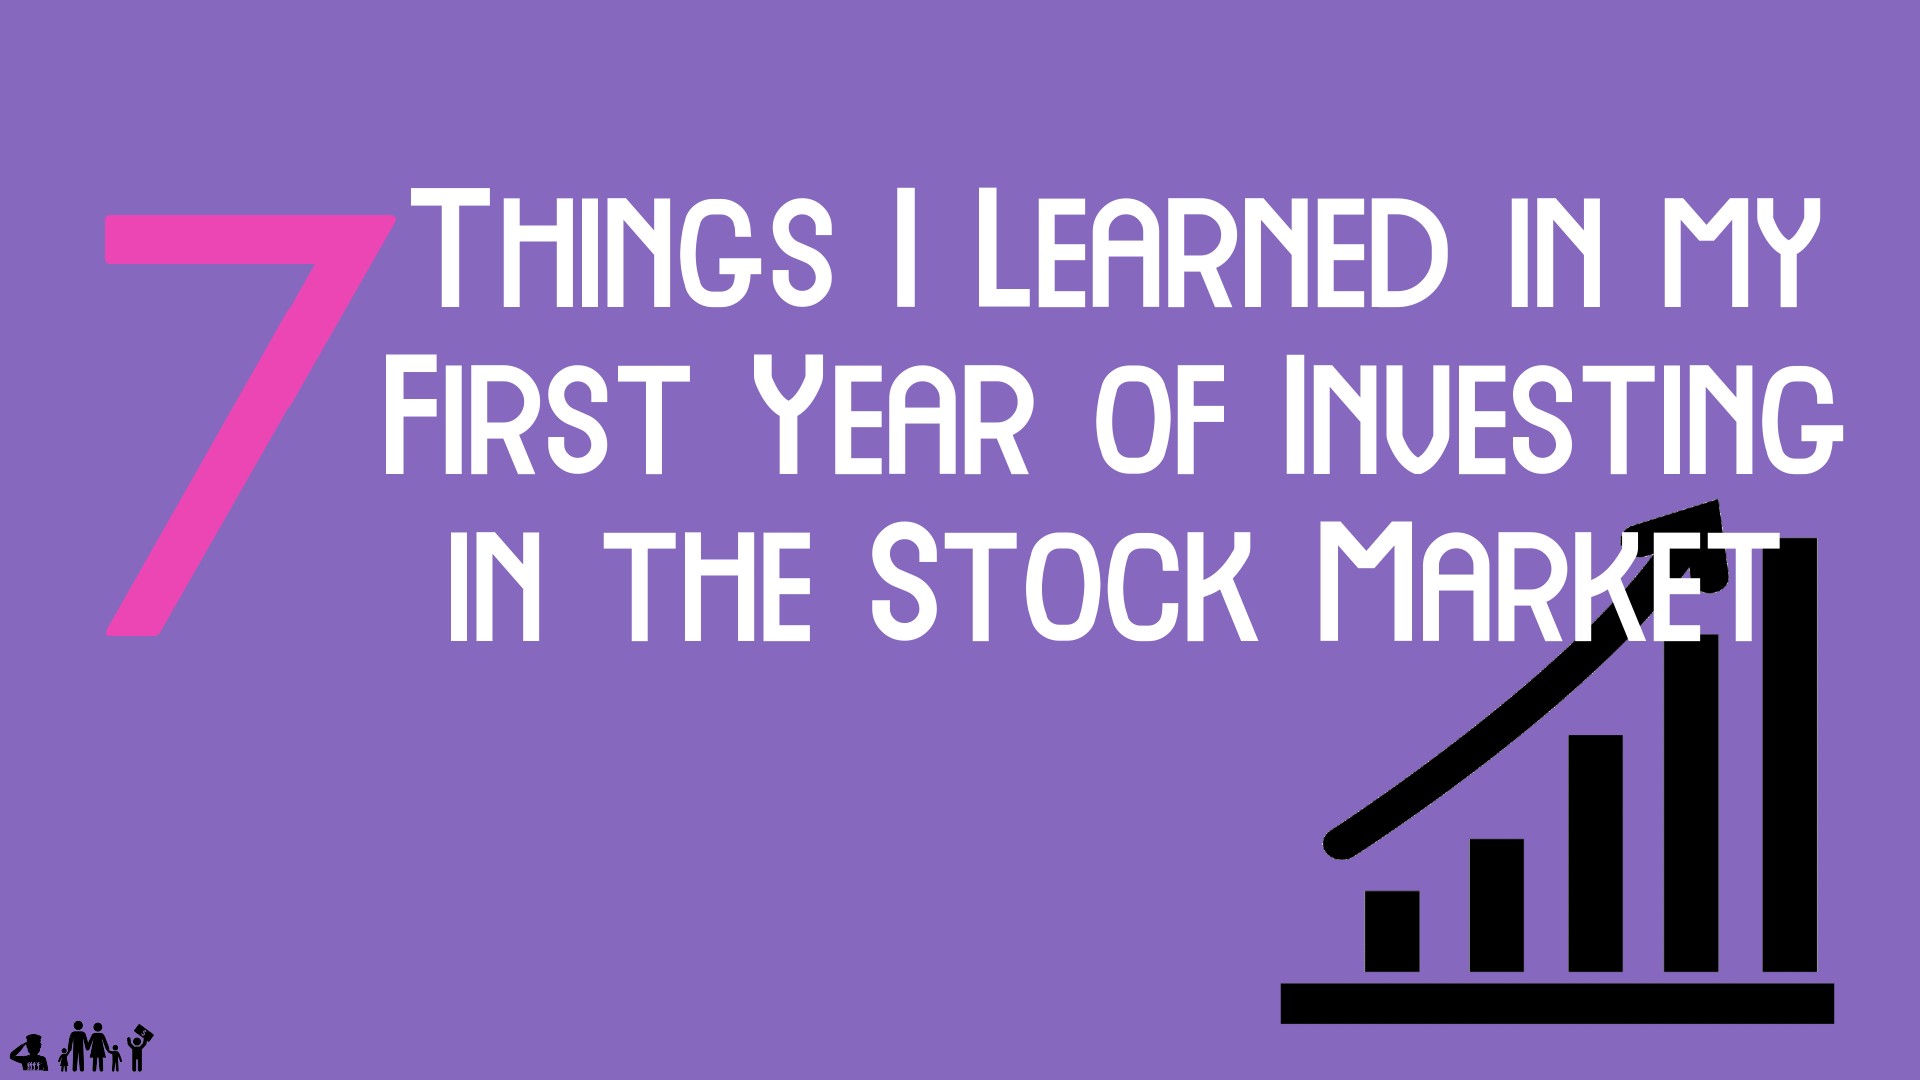 7 Things I Learned in my First Year of Investing in the Stock Market